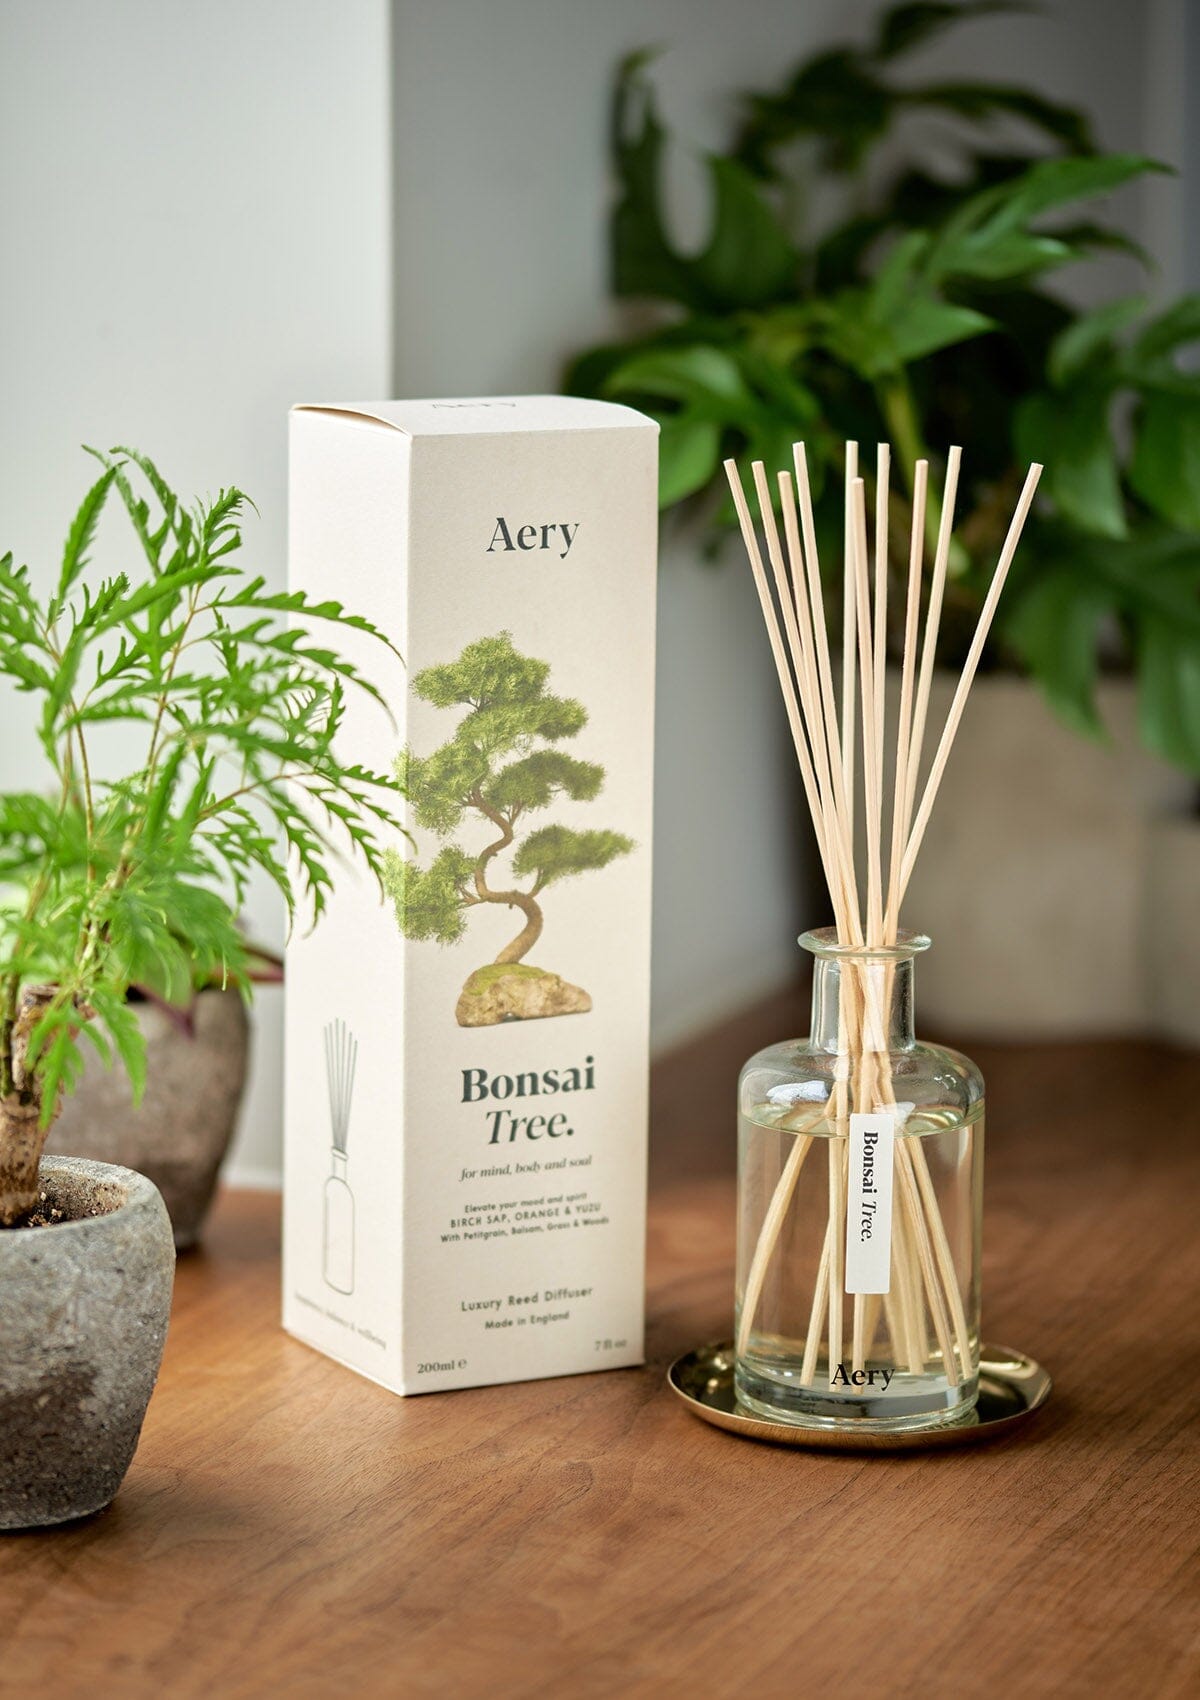 Cream Bonsai Tree diffuser displayed with product packaging on wooden bench with potted plants 